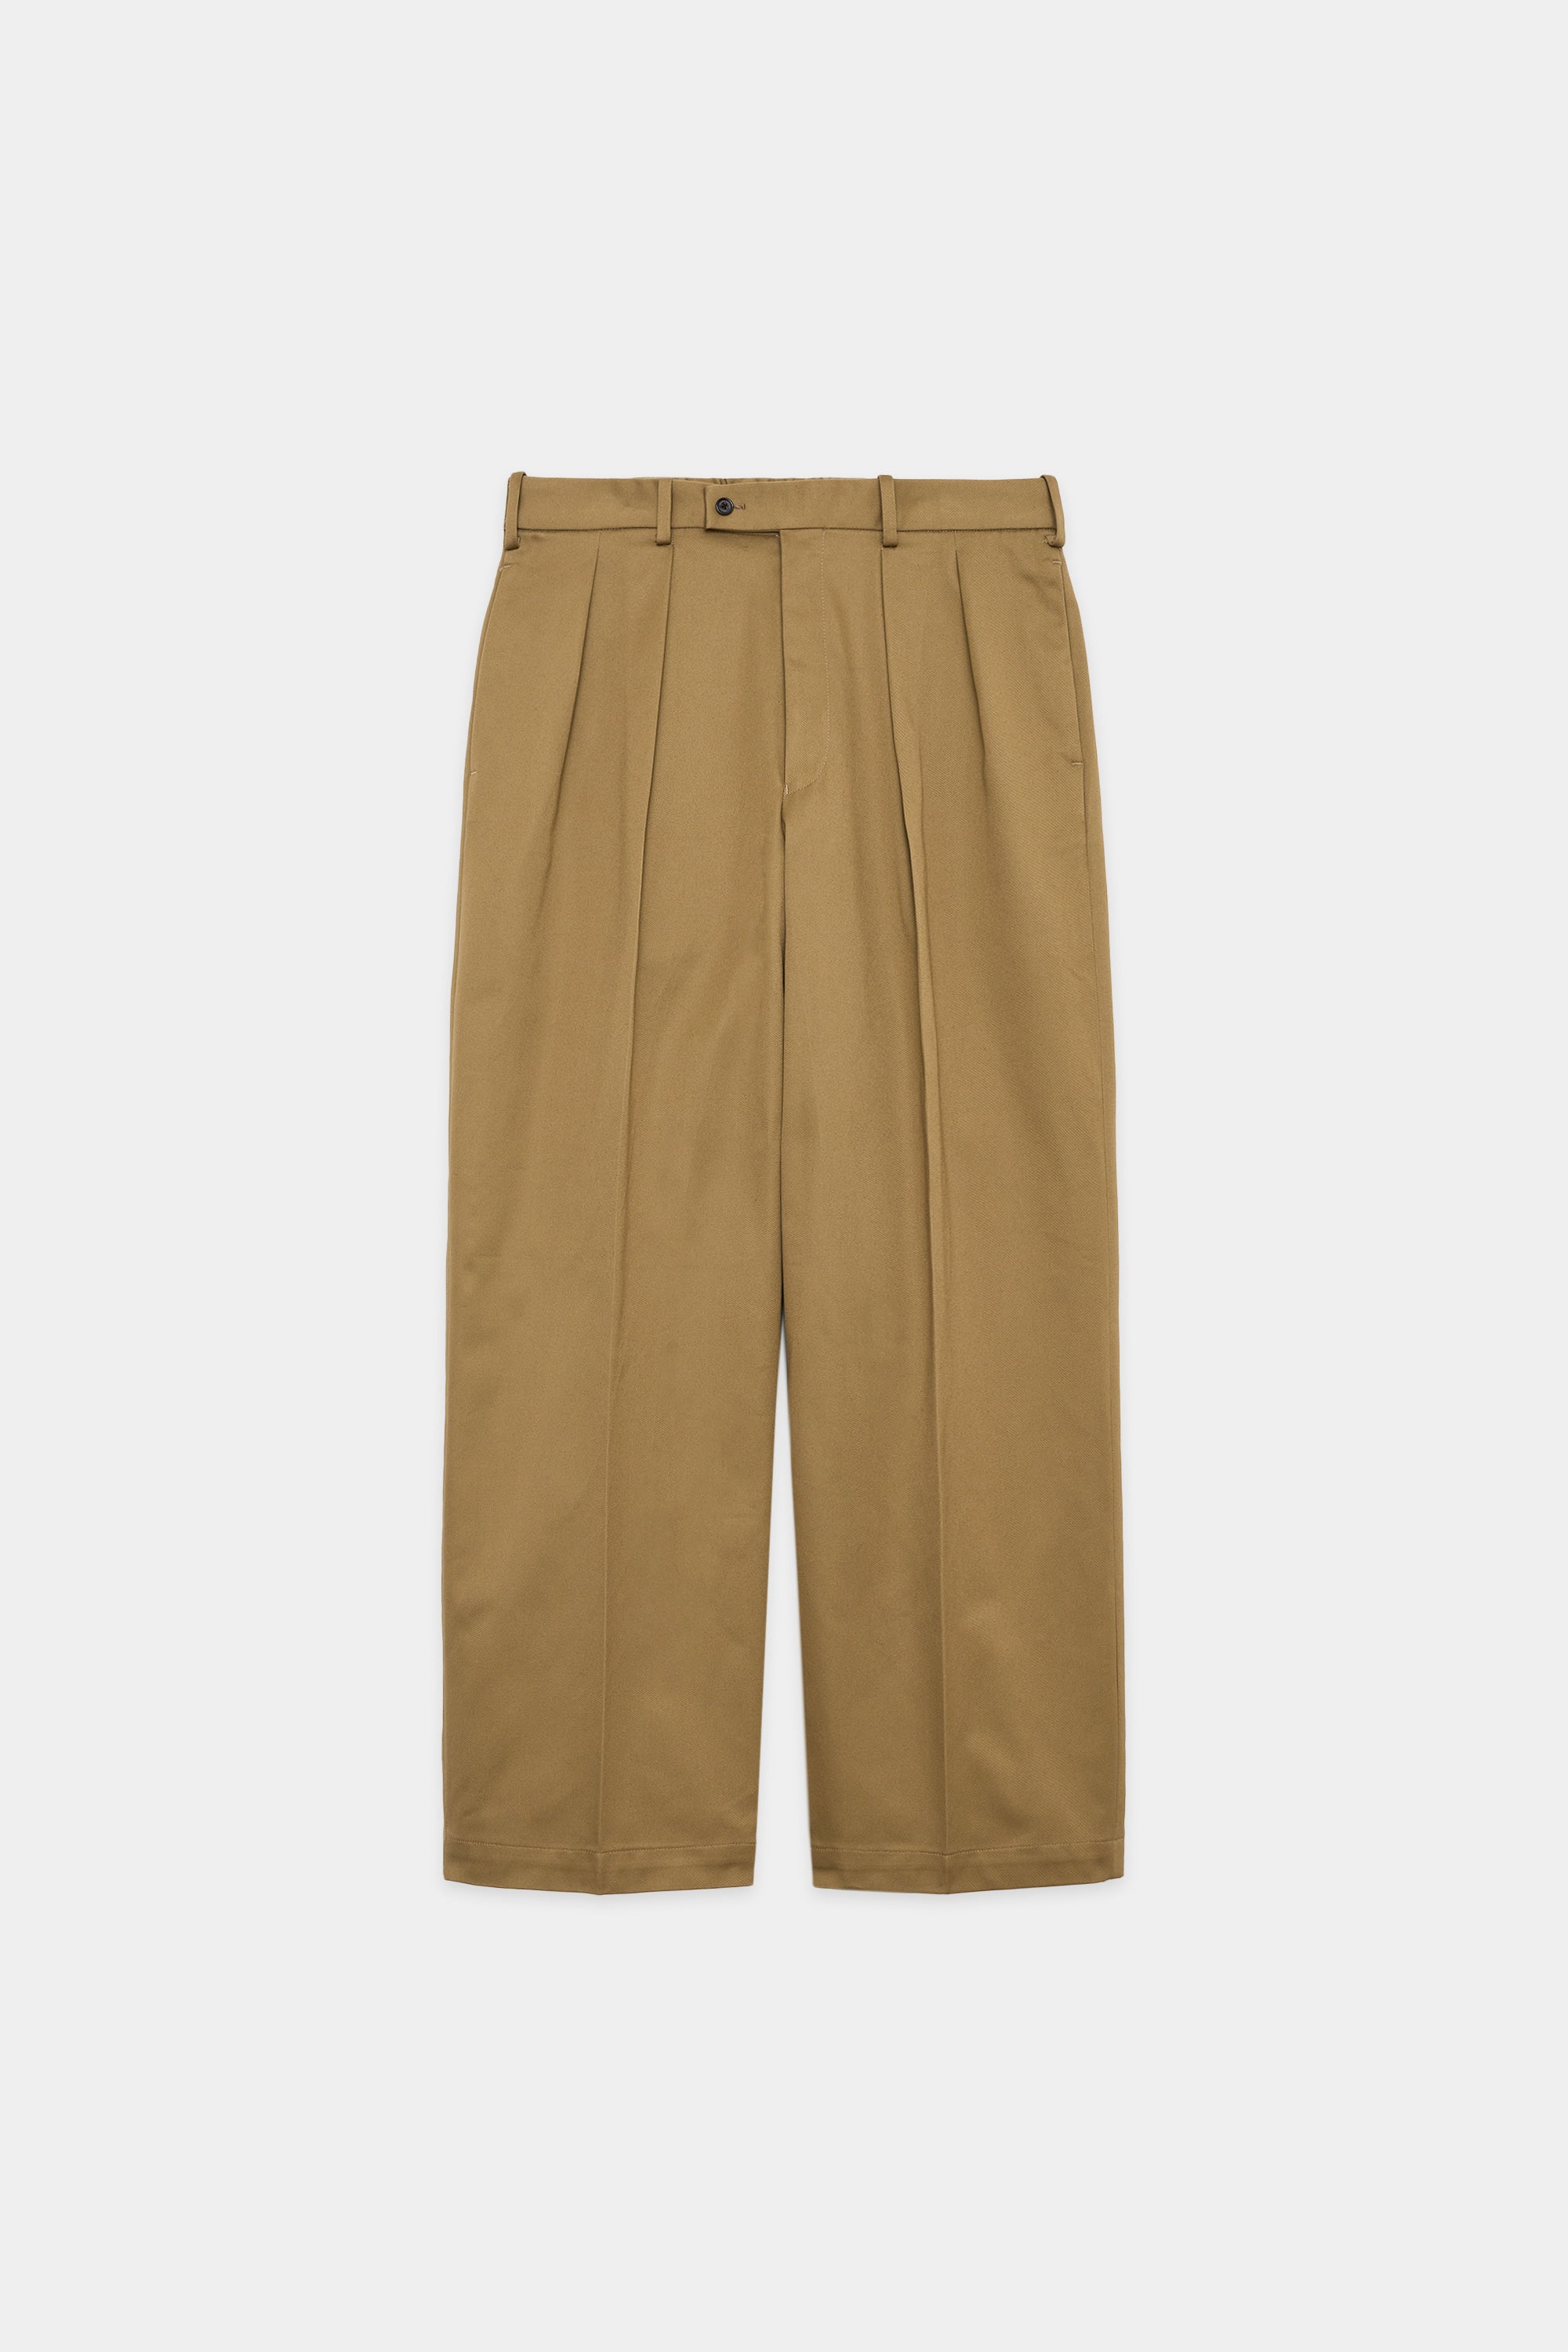 ORGANIC COTTON 30/2 TWILL DOUBLE PLEATED TROUSERS, Beige